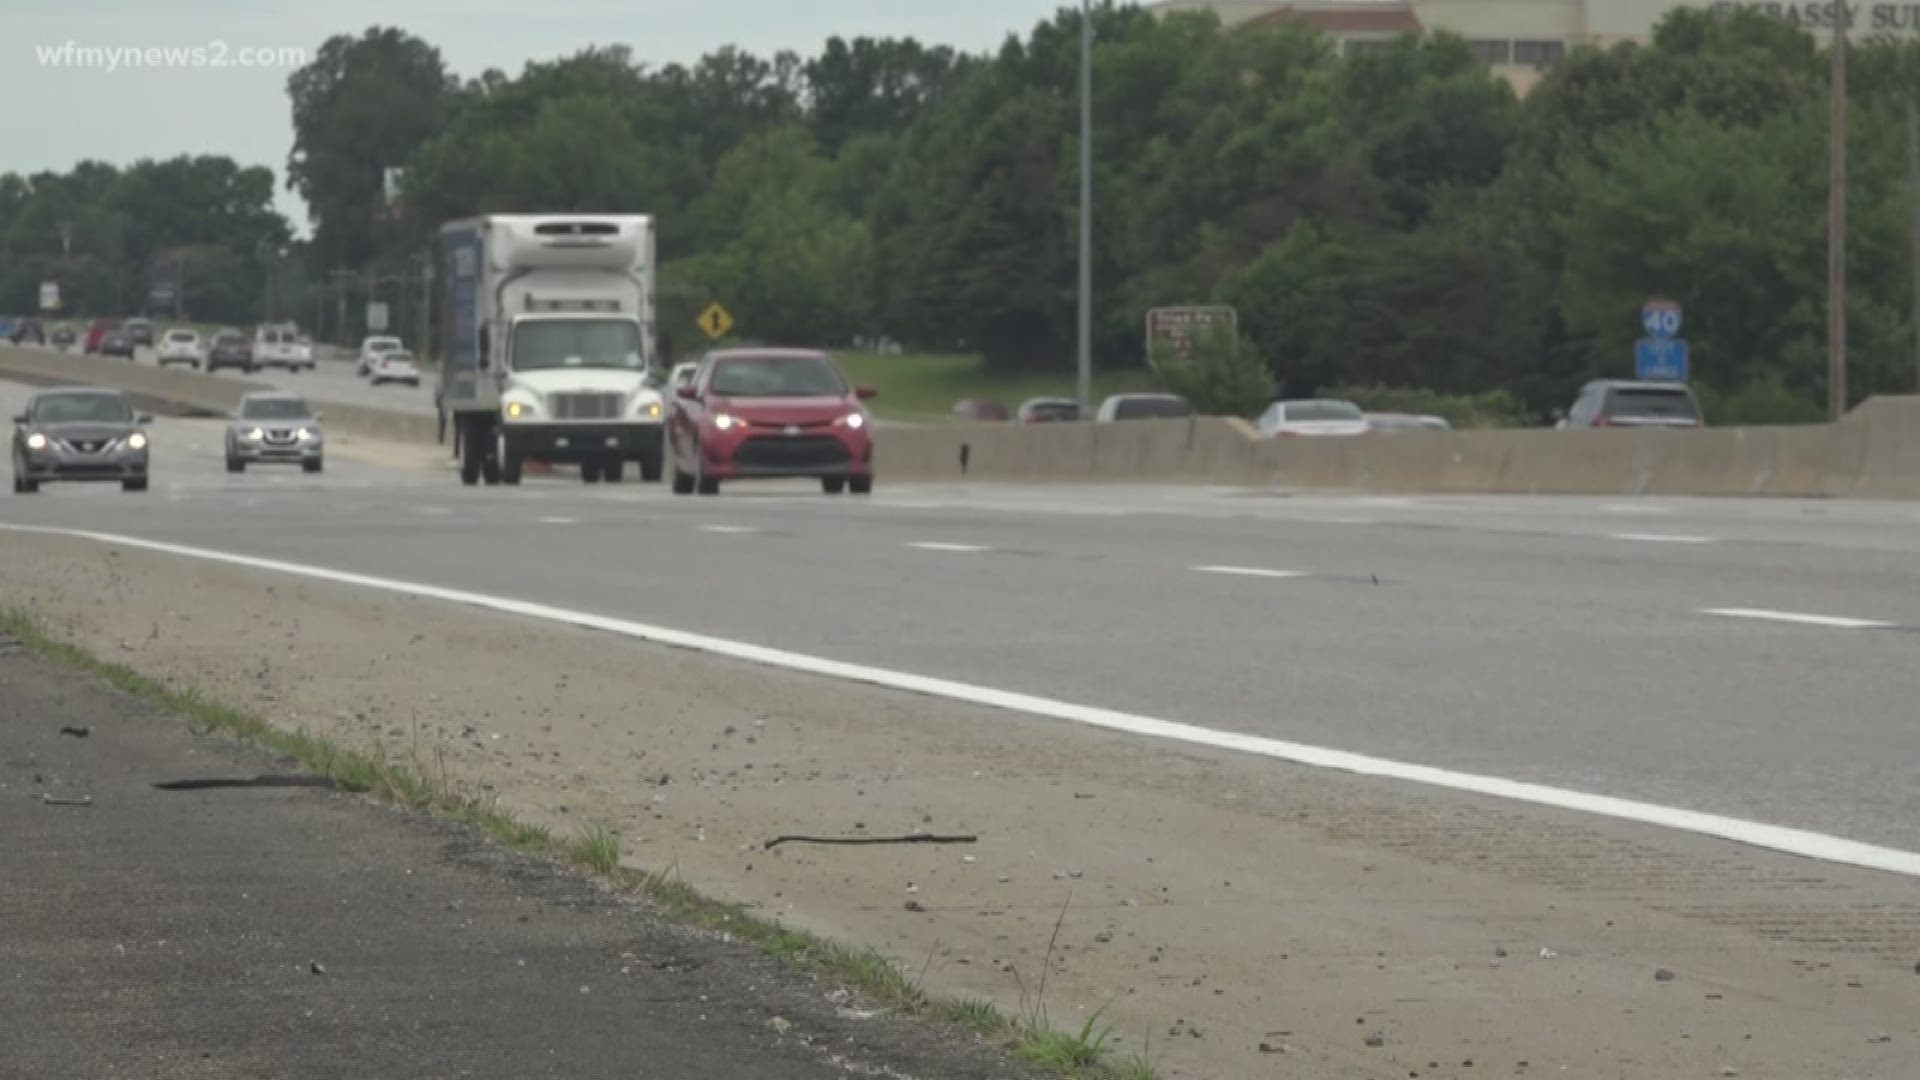 Police say if you’re driving 15 to 20 miles per hour over the limit, you’re not saving much travel time. Instead, you’re putting yourself in danger.